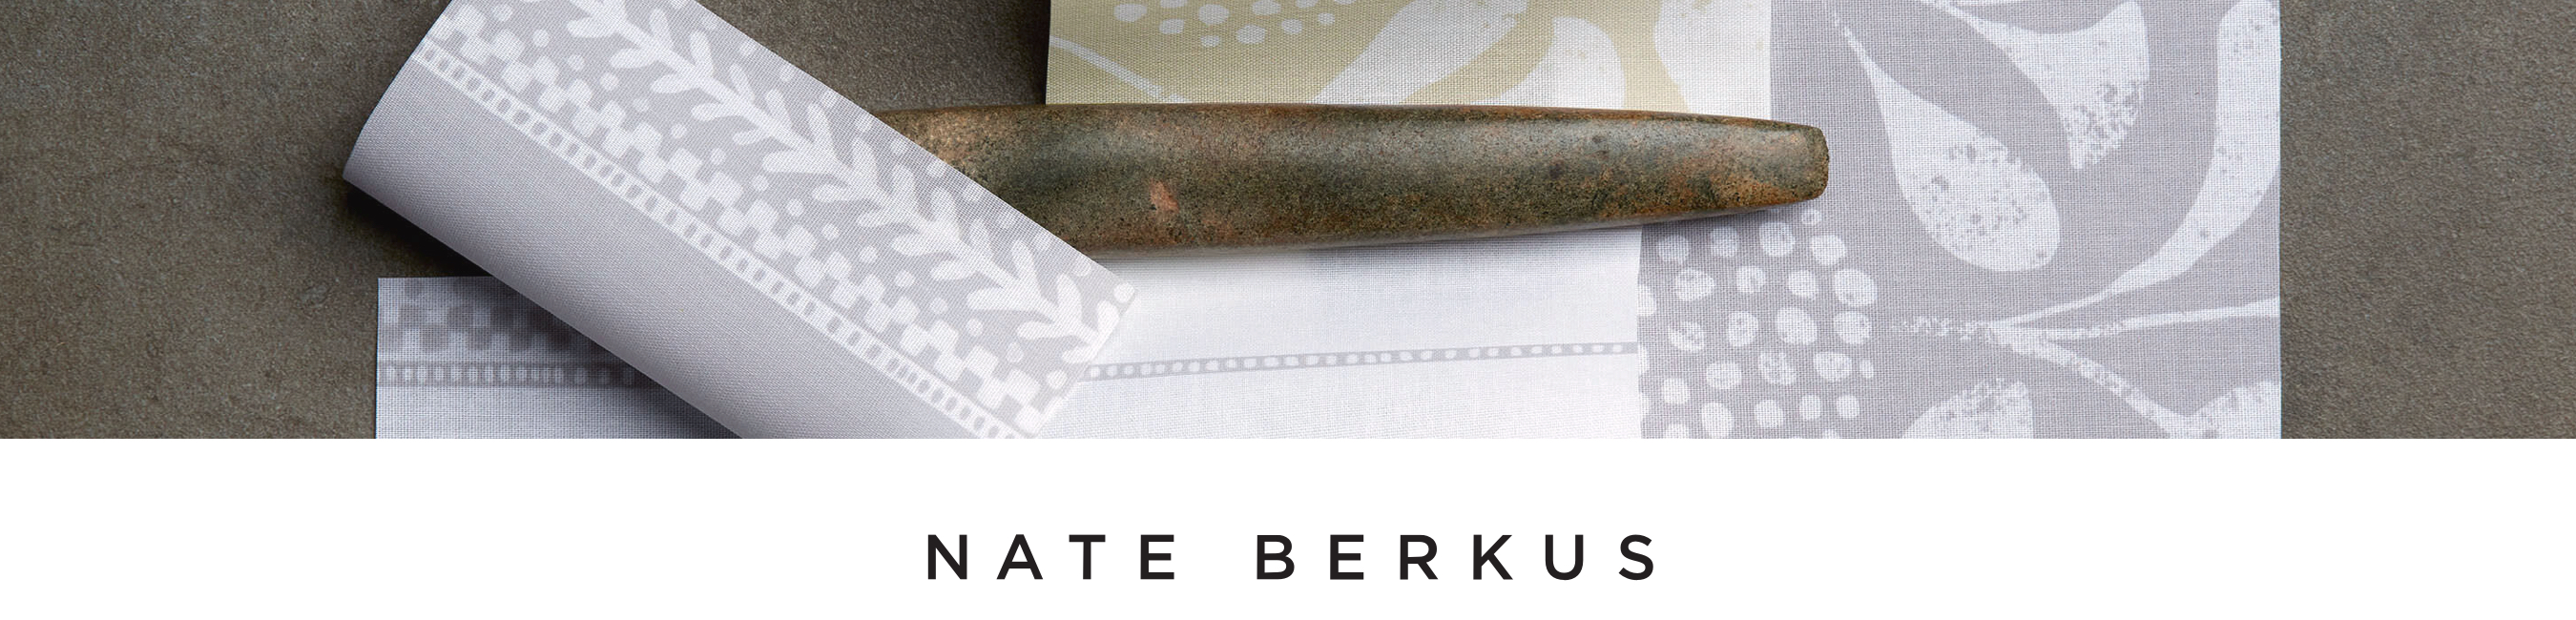 The Nate Berkus Collection for The Shade Store